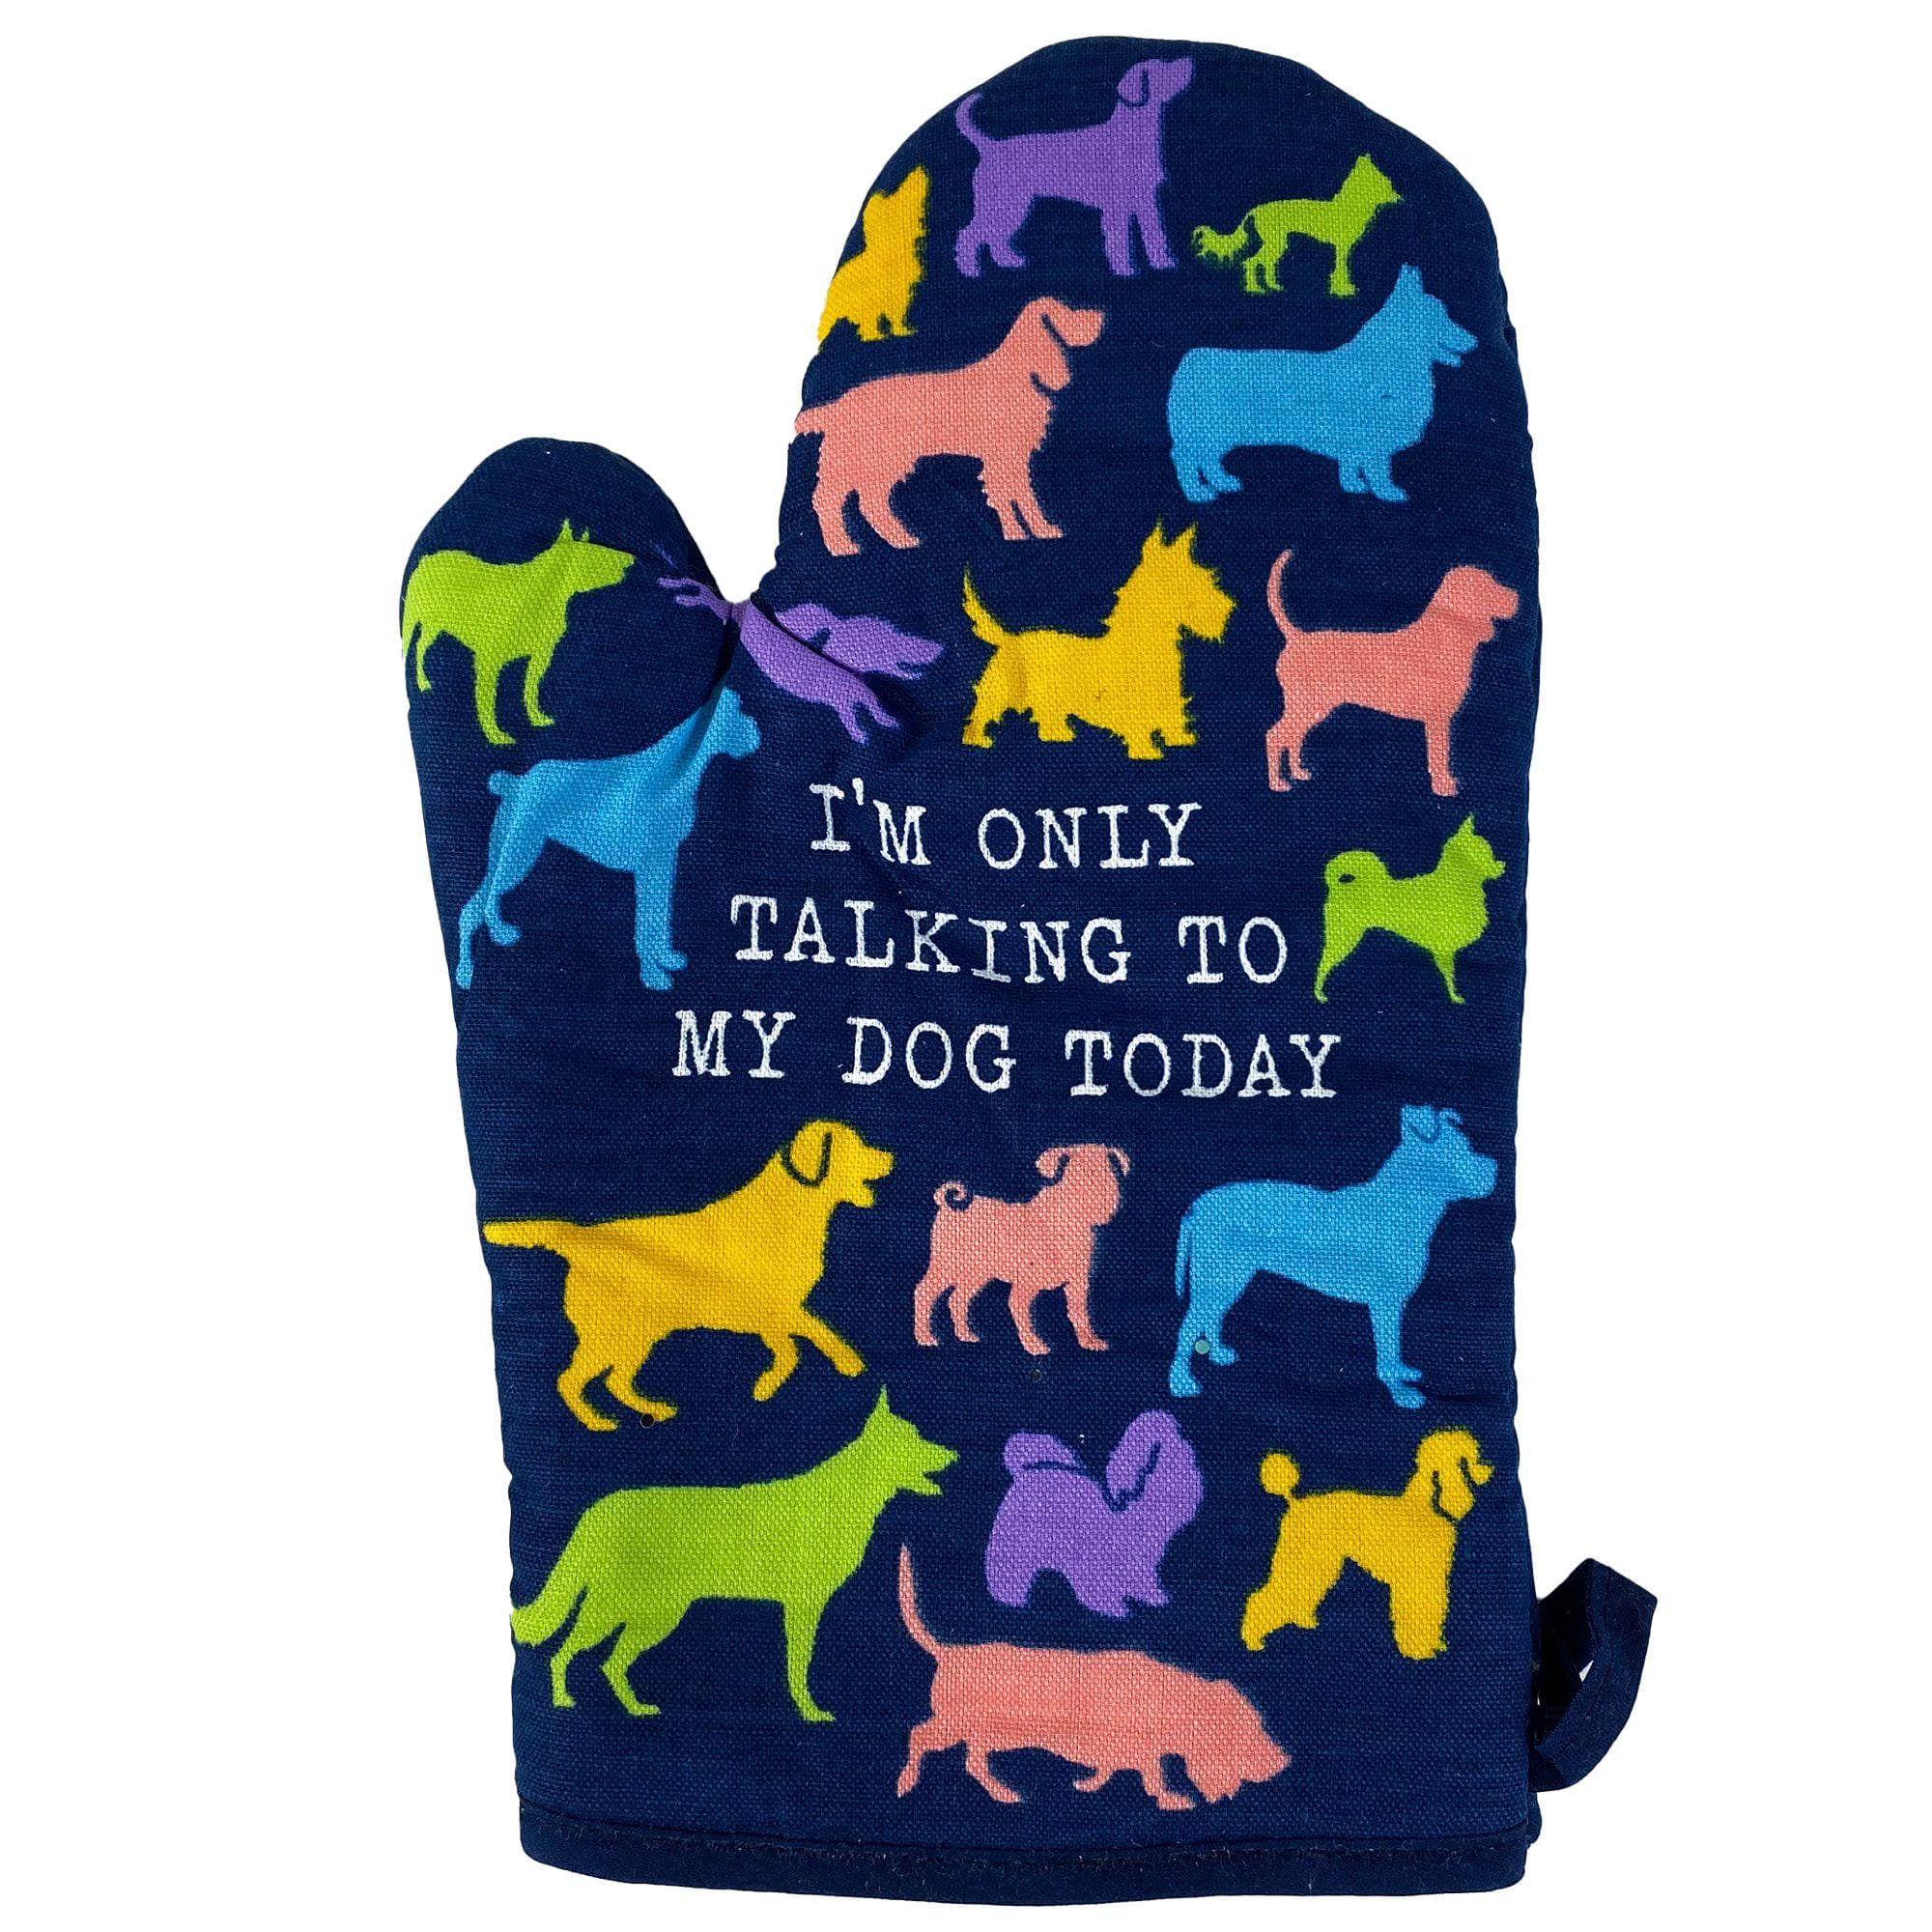 I'm Only Talking To My Dog Today - Crazy Dog T-Shirts